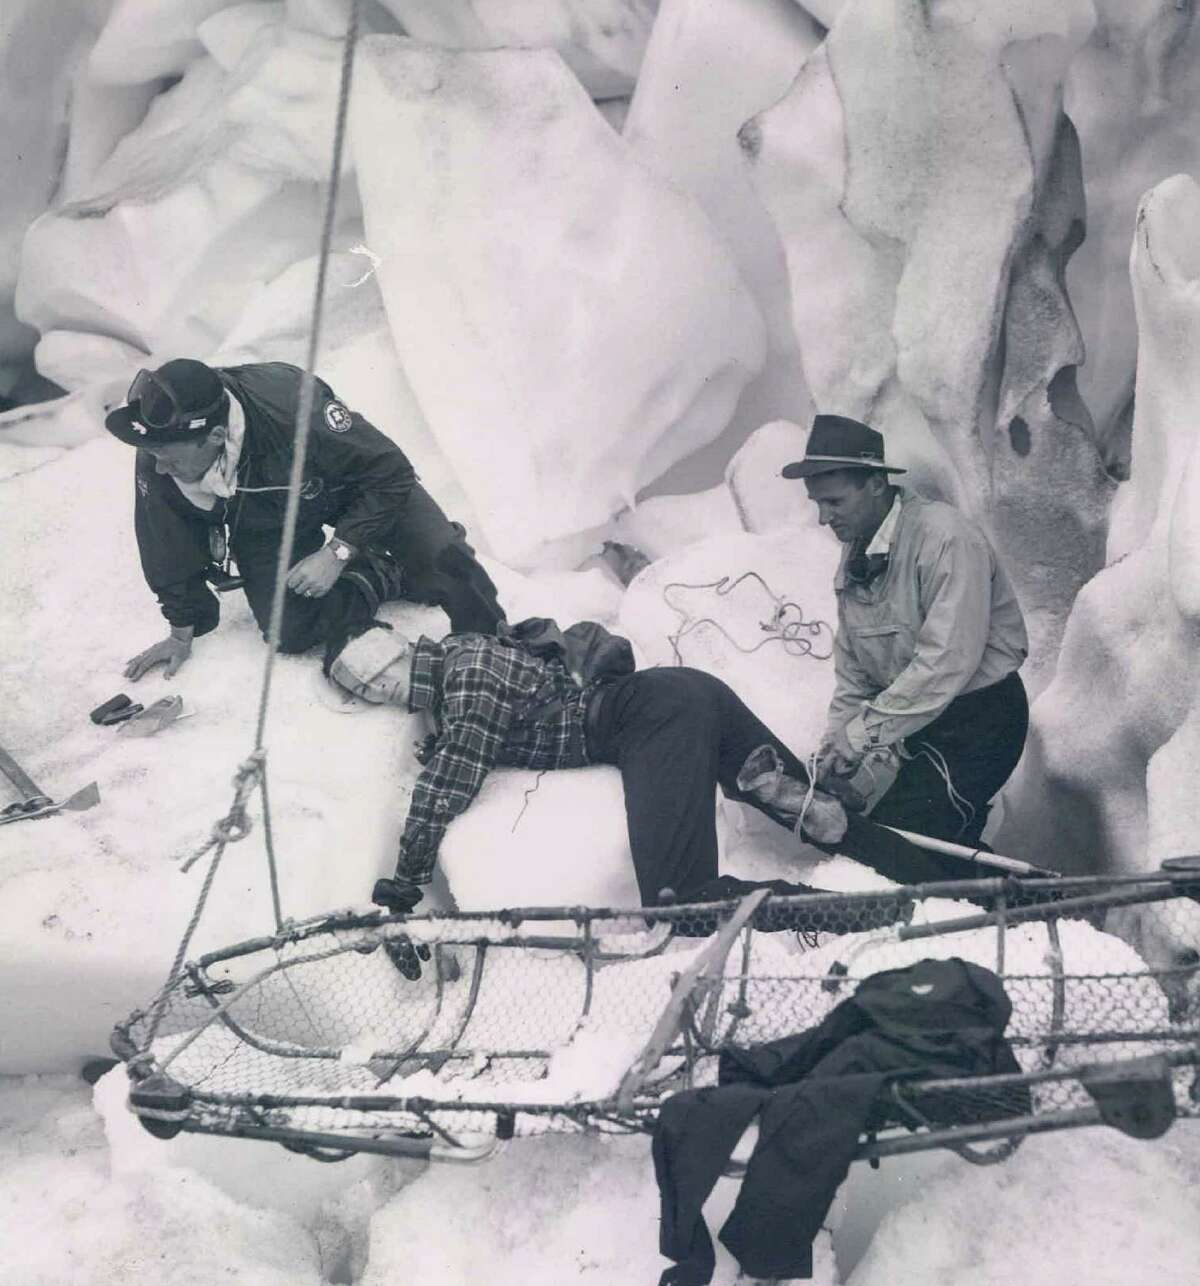 A Glacier Rescue is practiced by, from left, Kurt Beam, Jim Slauson and Dee Molenaar. They are in a crevasse on Nisqually Glacier, Mount Rainier.